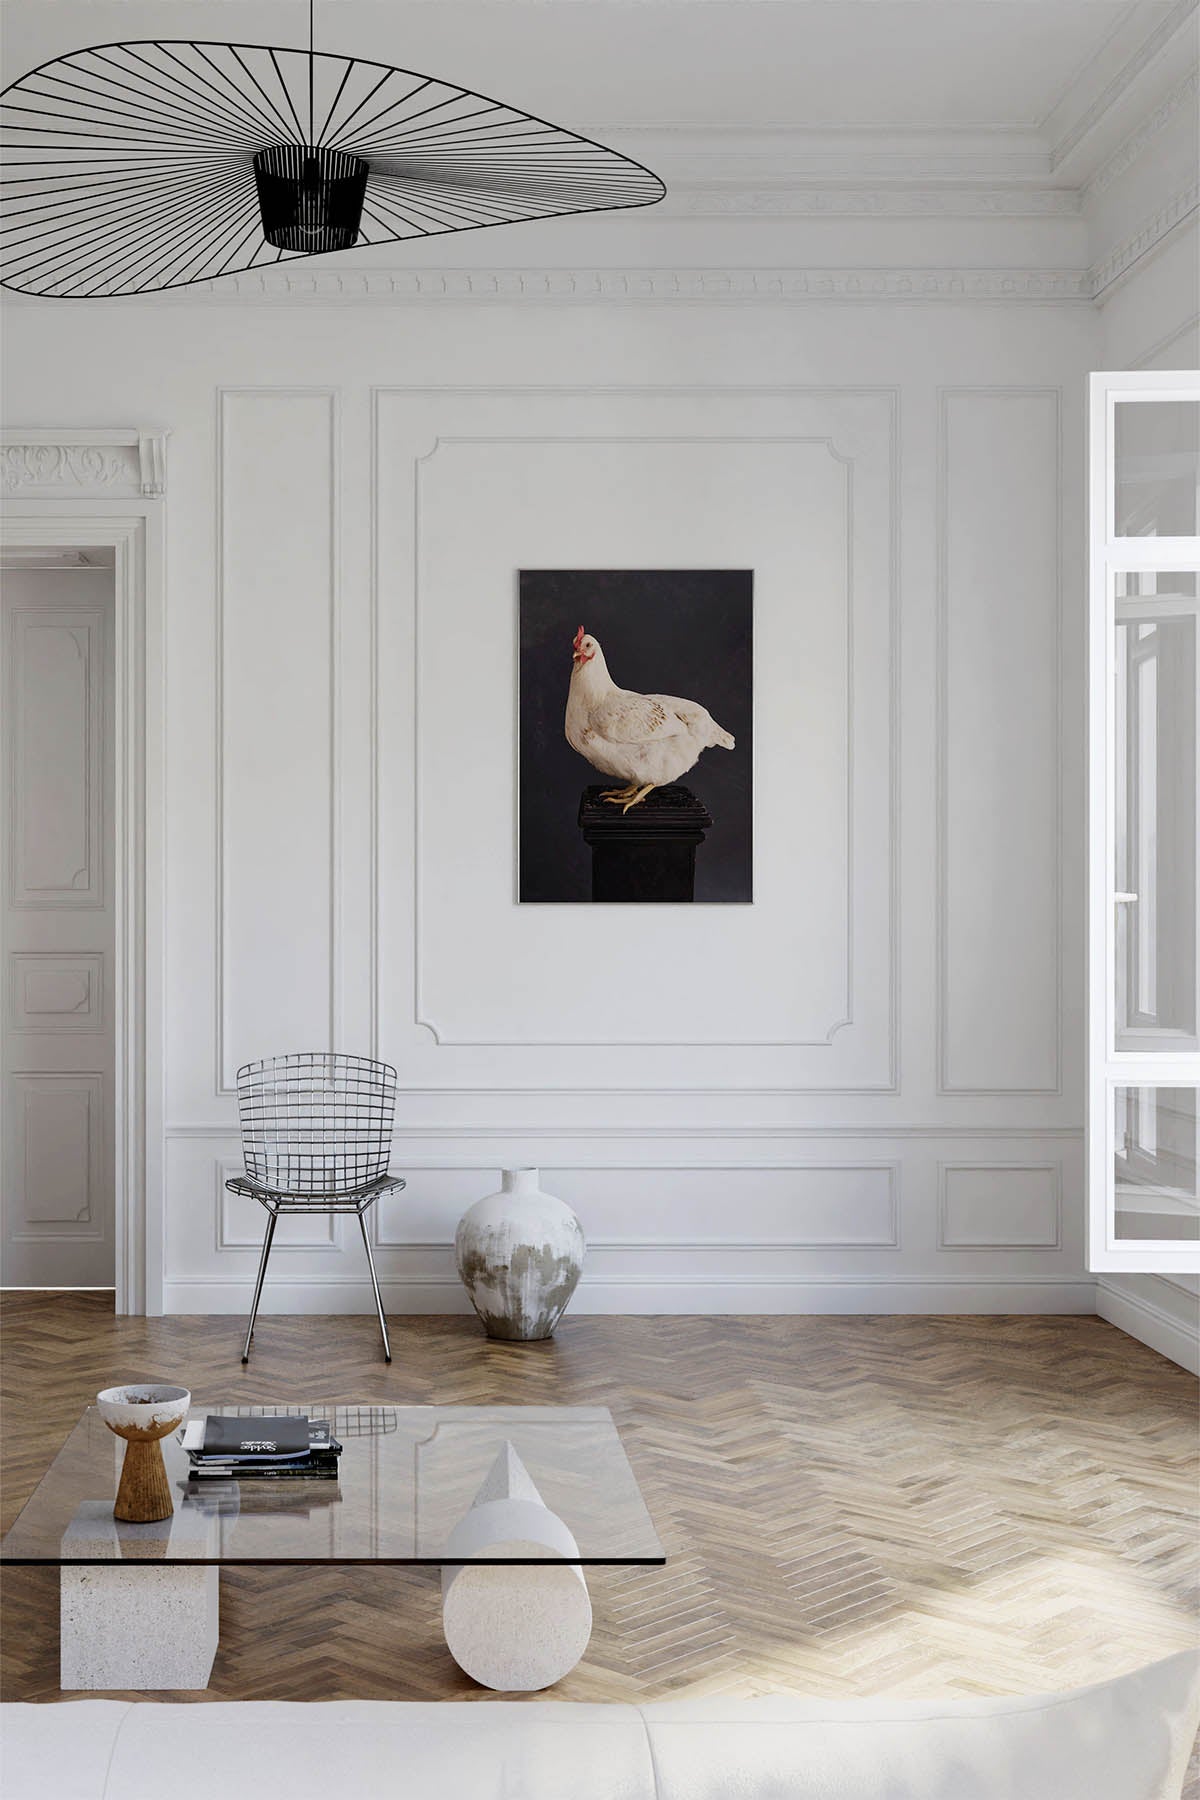 Fine Art Print Of A White Chicken Standing On A Black Plinth With A Black Background Framed On A Wall In An European Style Entry Way or Living Room Near A Harry Bertoia Mid Century Wire Chair and open window.